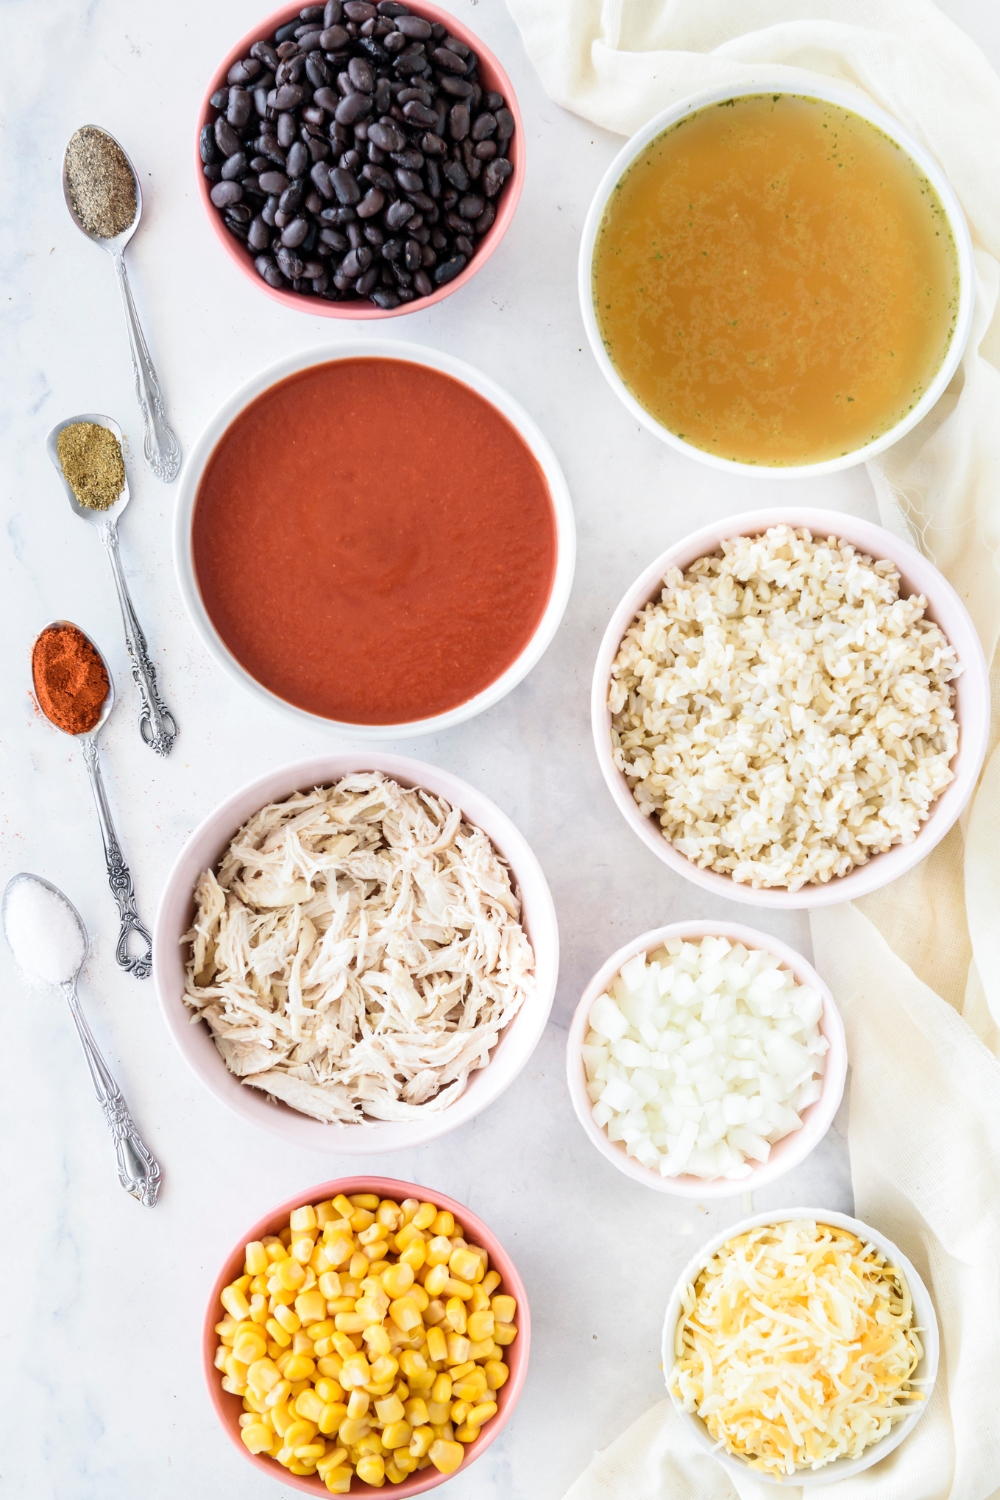 An assortment of ingredients including bowls of black beans, tomato sauce, broth, shredded chicken, rice, corn, shredded cheese, onion, and spoonfuls of spices.